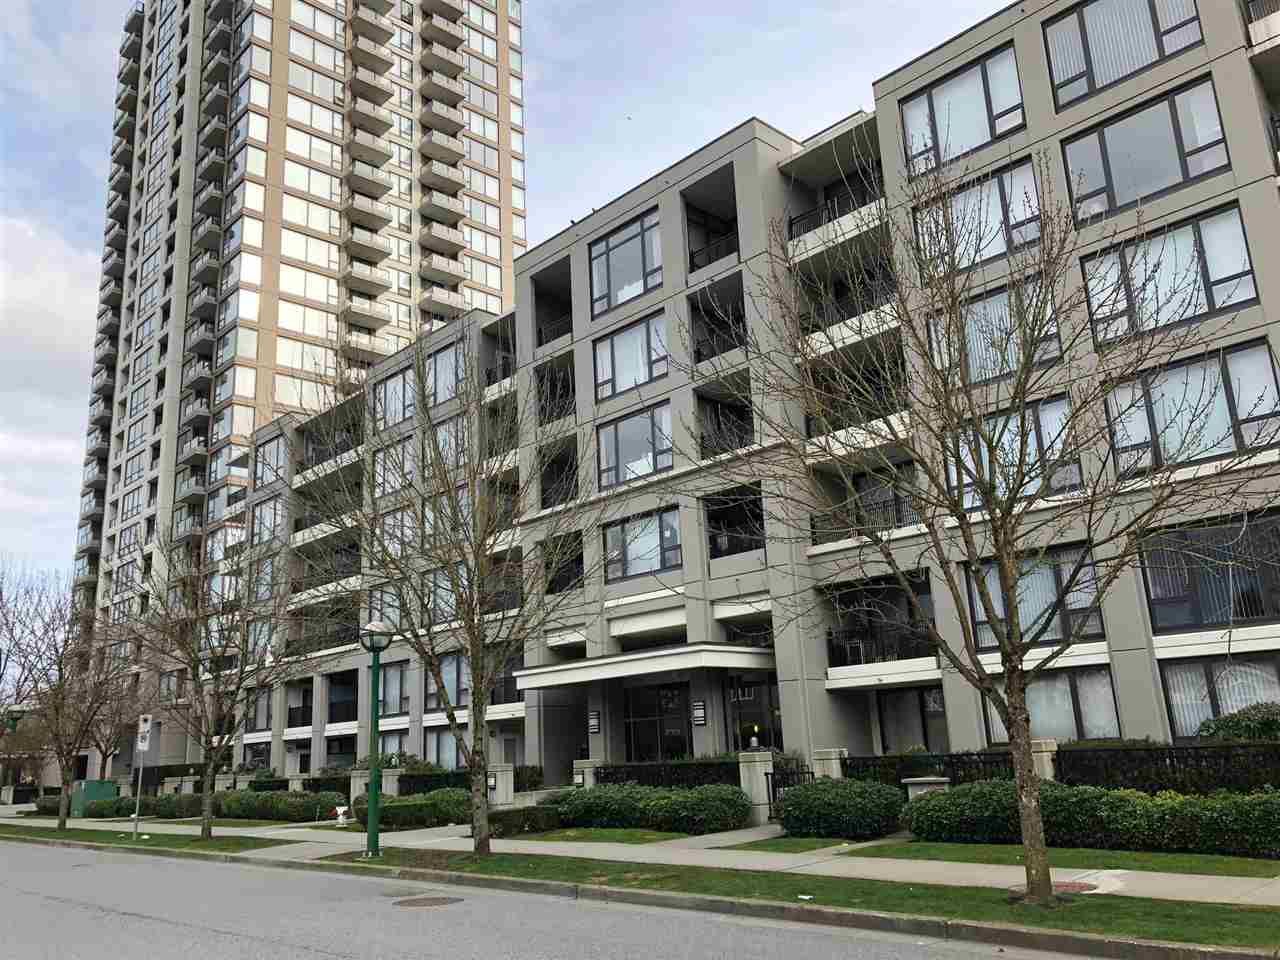 Main Photo: 112 7138 COLLIER Street in Burnaby: Highgate Condo for sale (Burnaby South)  : MLS®# R2266135